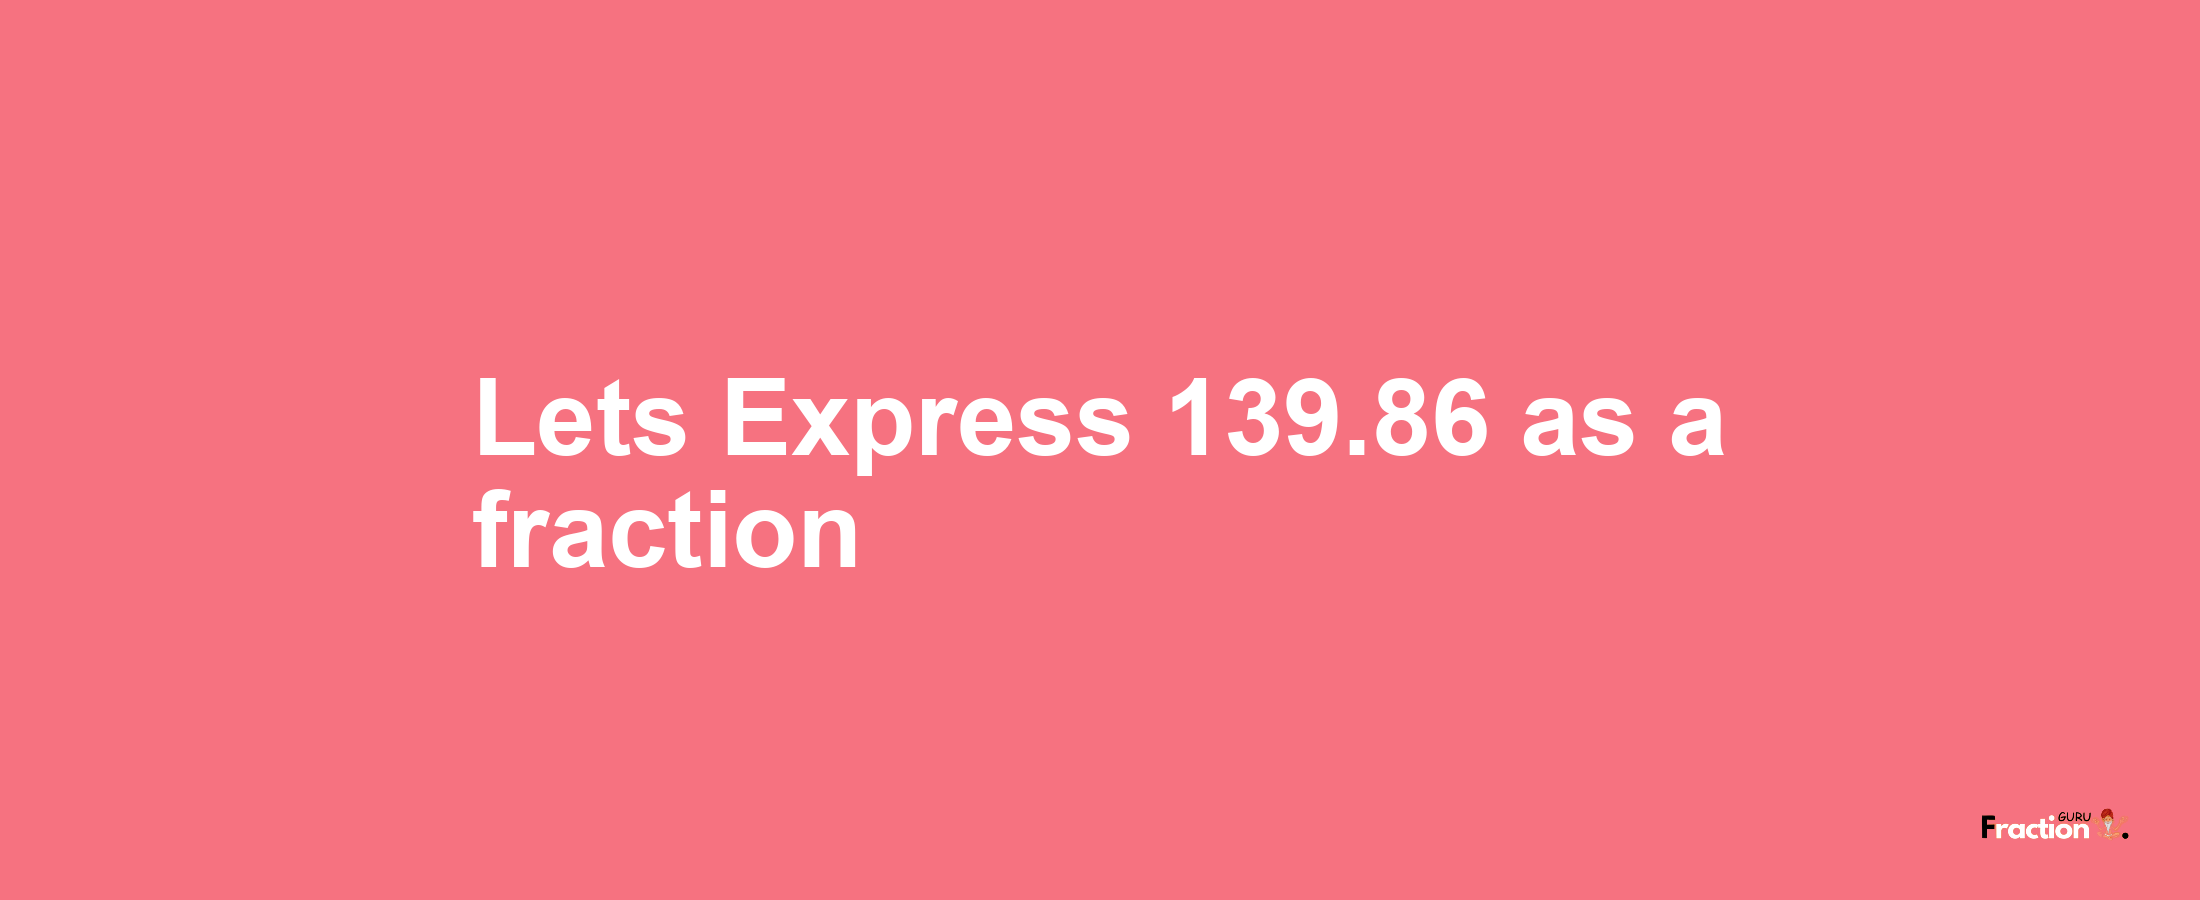 Lets Express 139.86 as afraction